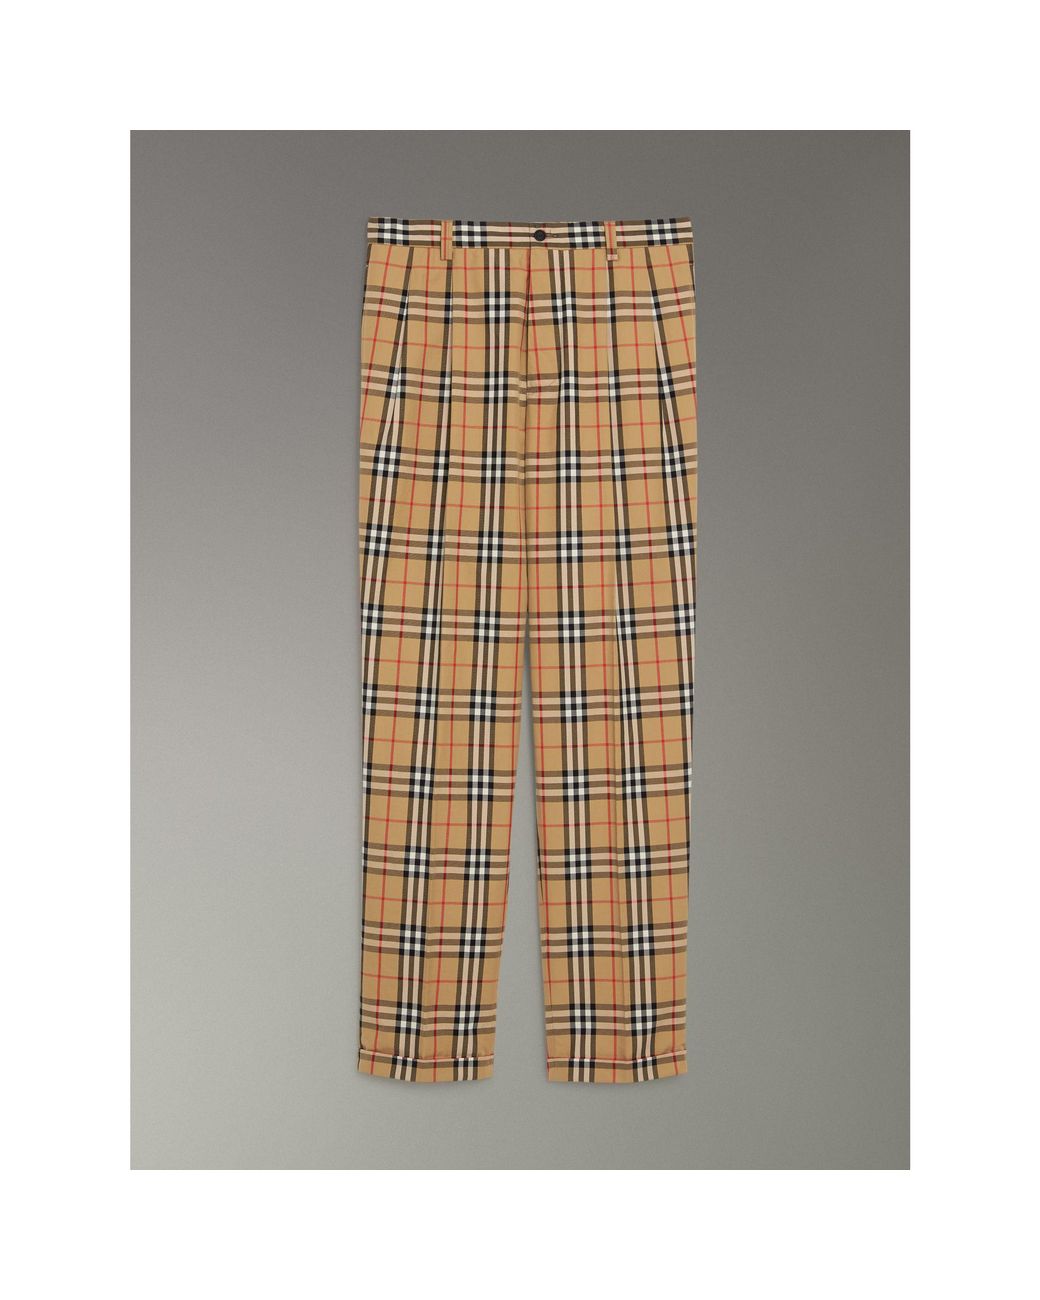 Burberry Mens Vintage Check High Waisted Trouser In Antique Yellow Brand  Size 56 Waist Size 39 8010177  Apparel  Jomashop